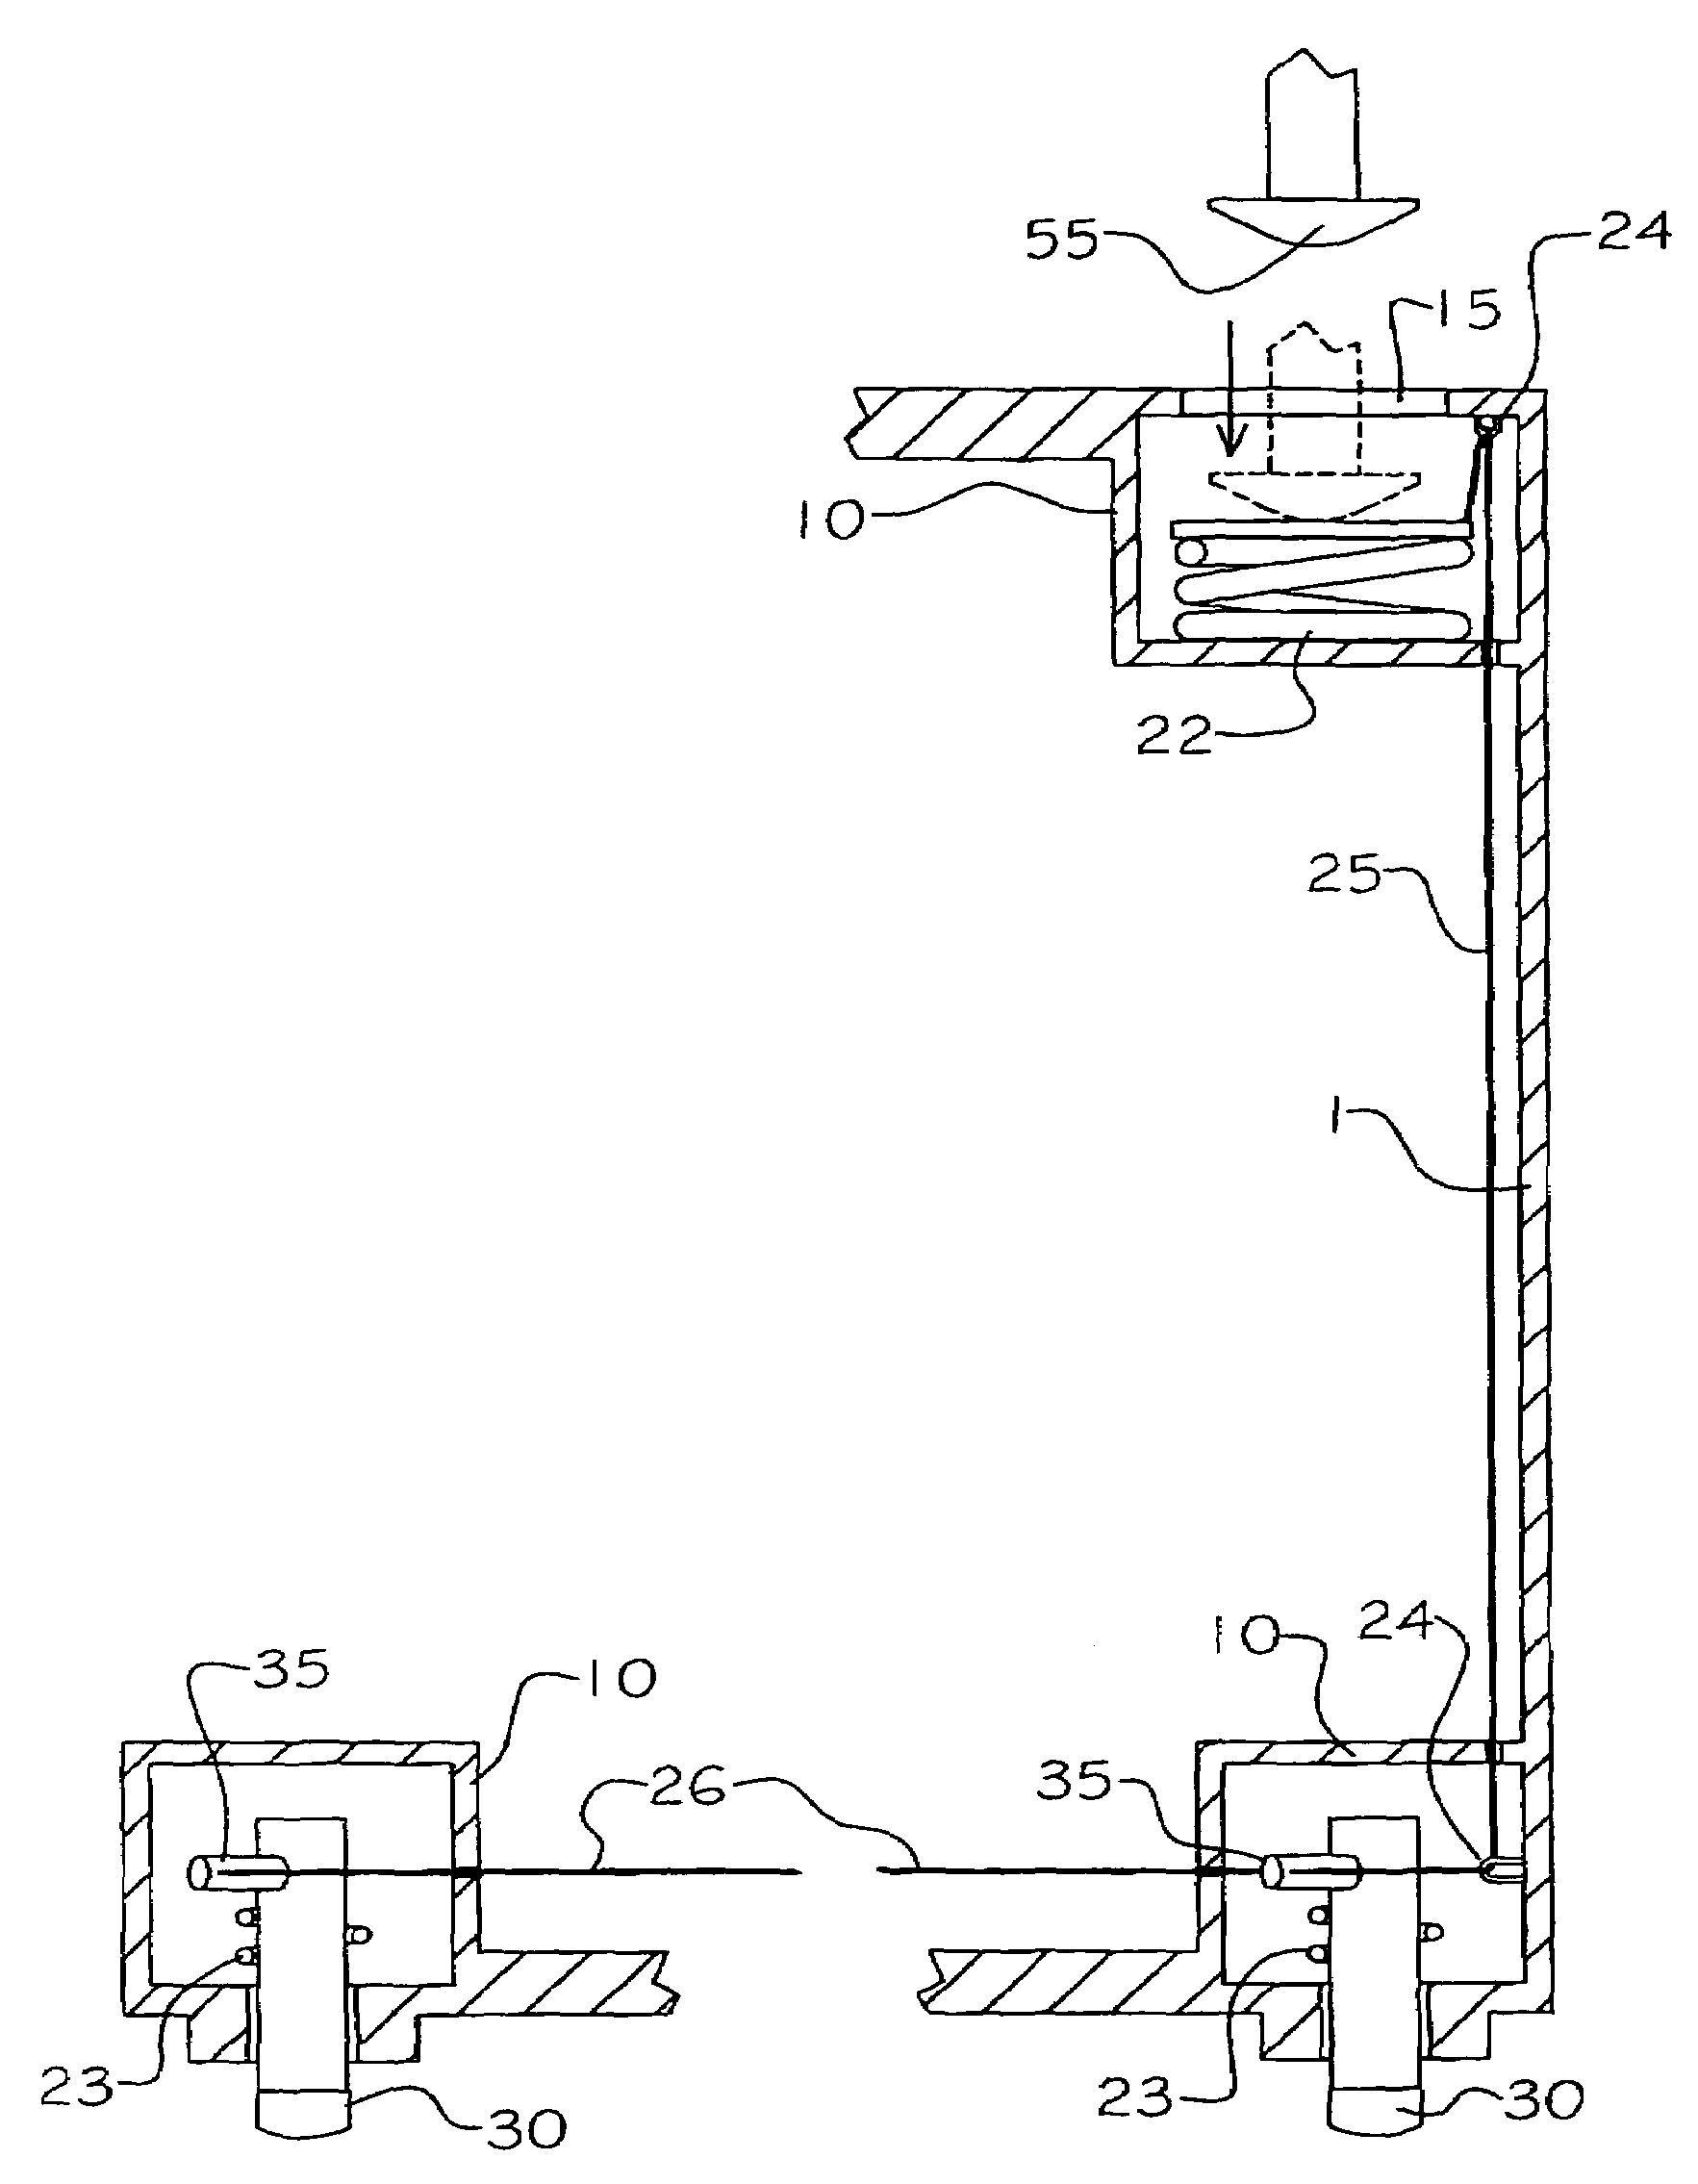 Integrated corner casting locking mechanism for shipping containers